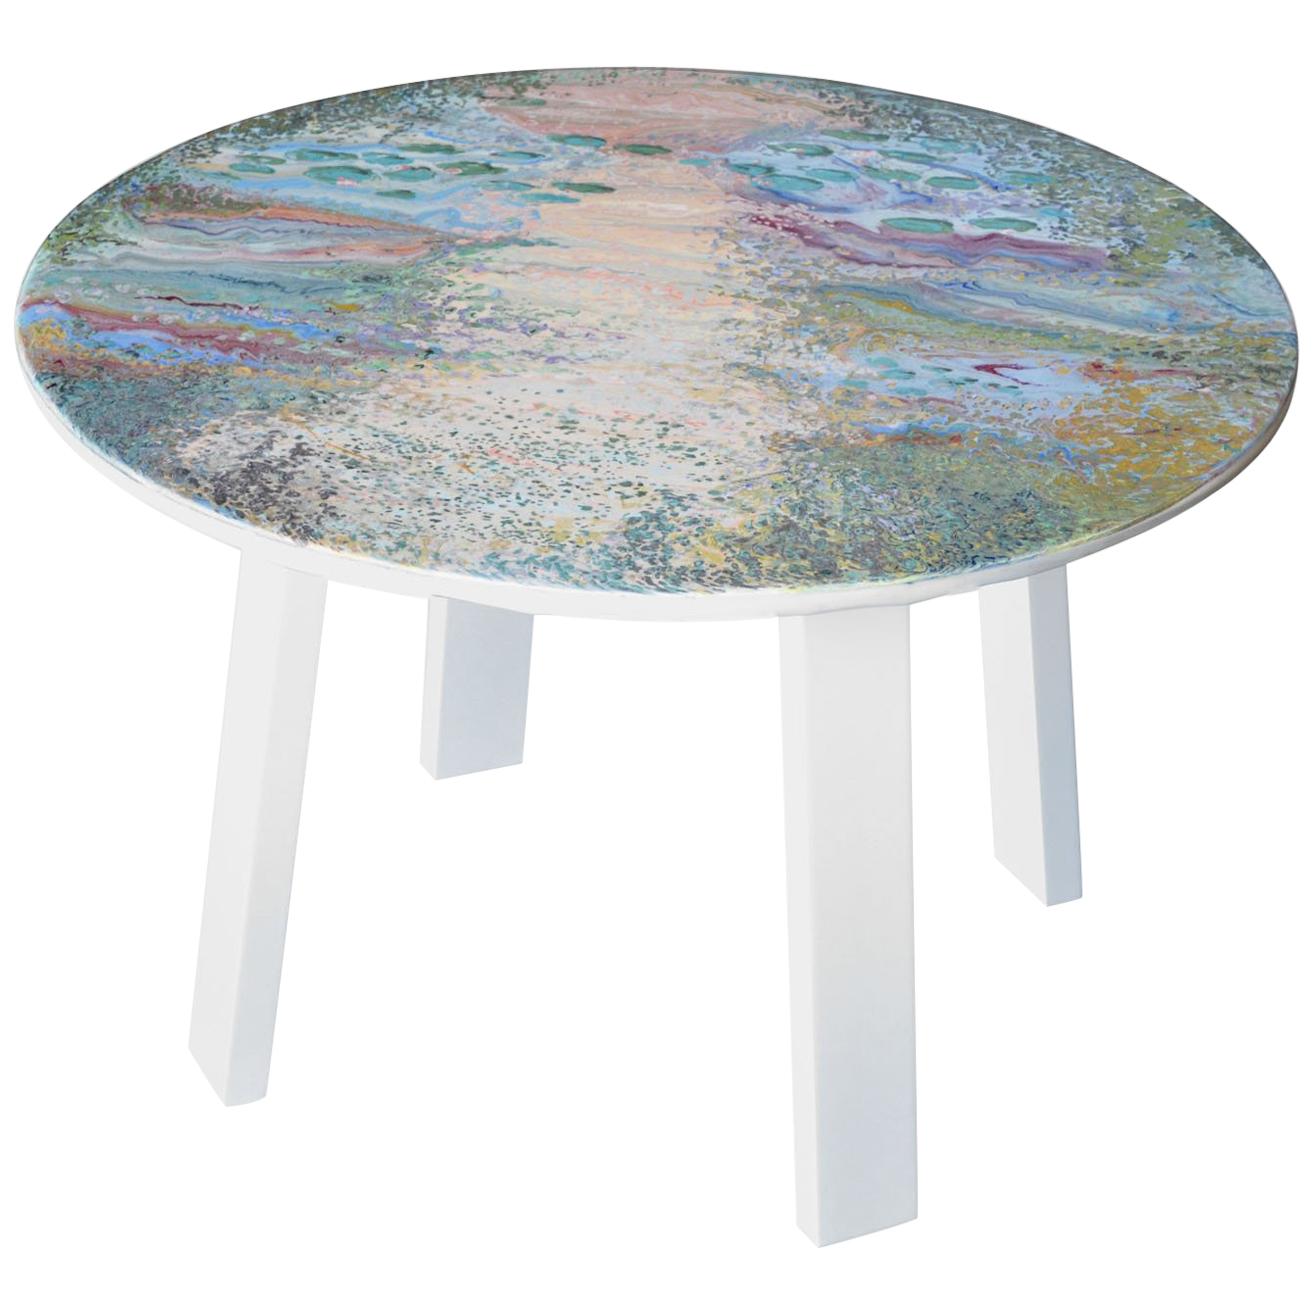 This small table made with marble top decorated entirely with scagliola, whose decoration is a tribute to the French artist Monet and resumes its famous water lilies in a rather abstract vision. The round top was deliberately made by hand leaving